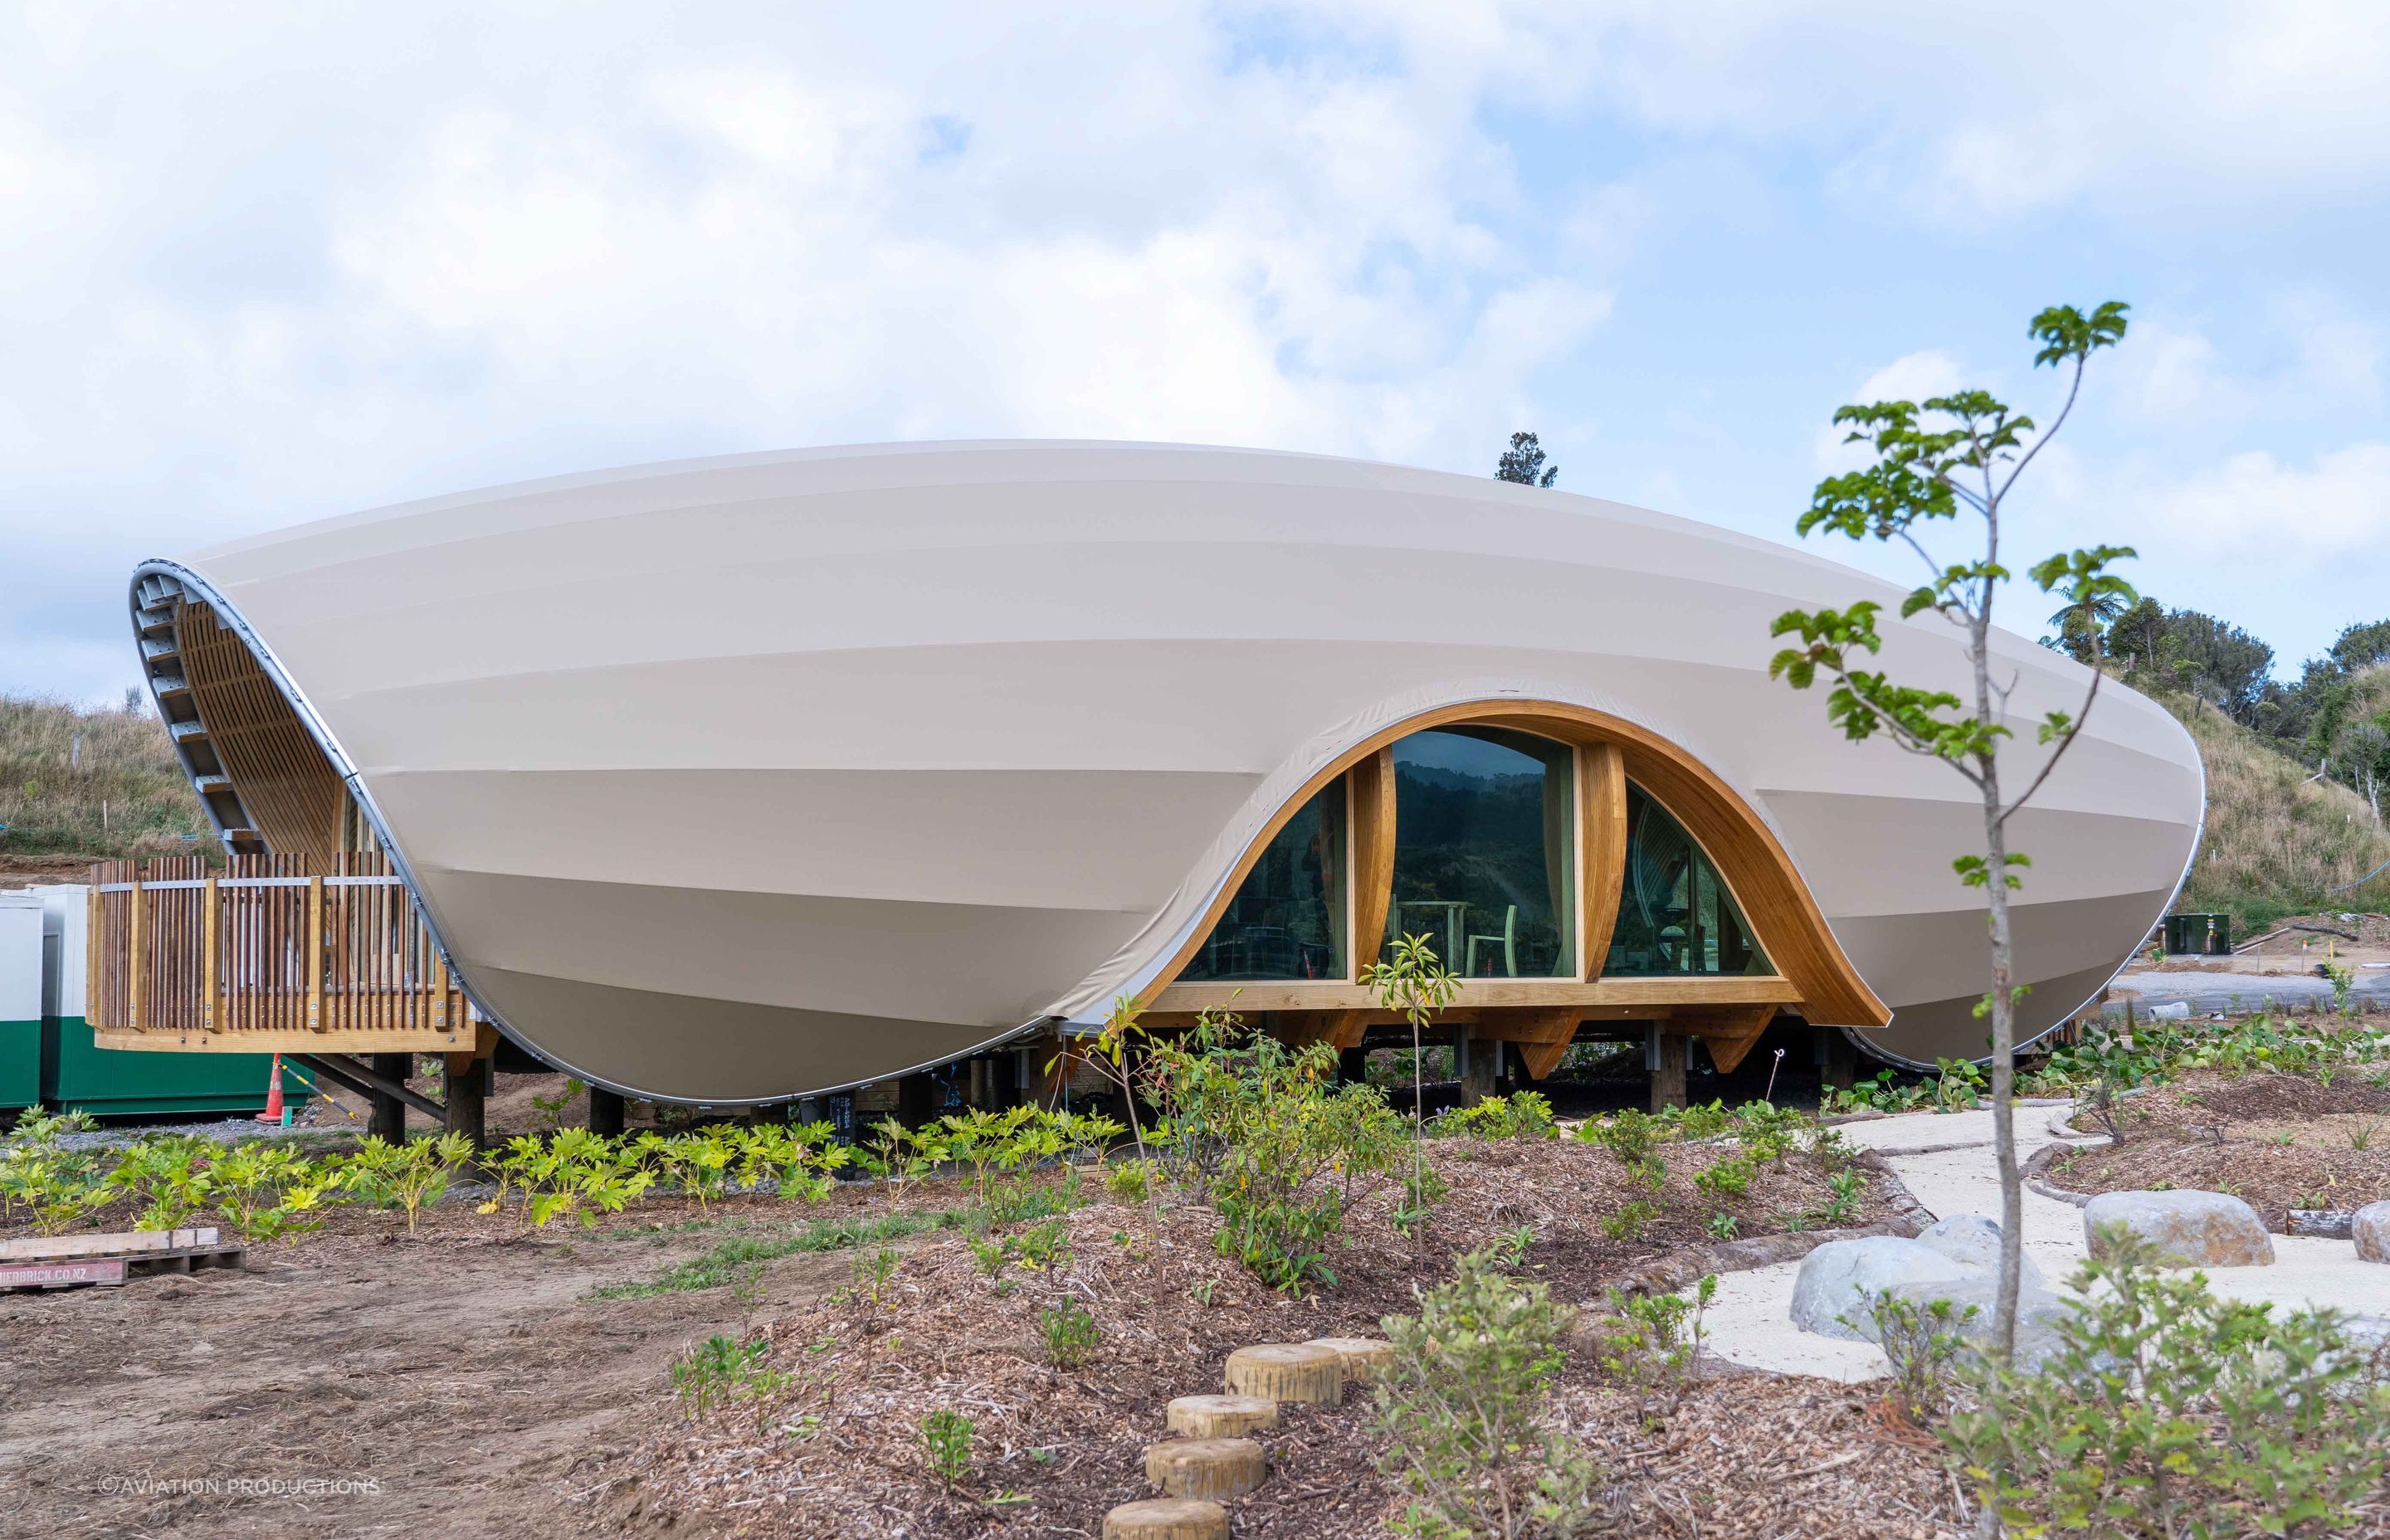 A recyclable PVC membrane was used for the exterior to allow for the curved form.